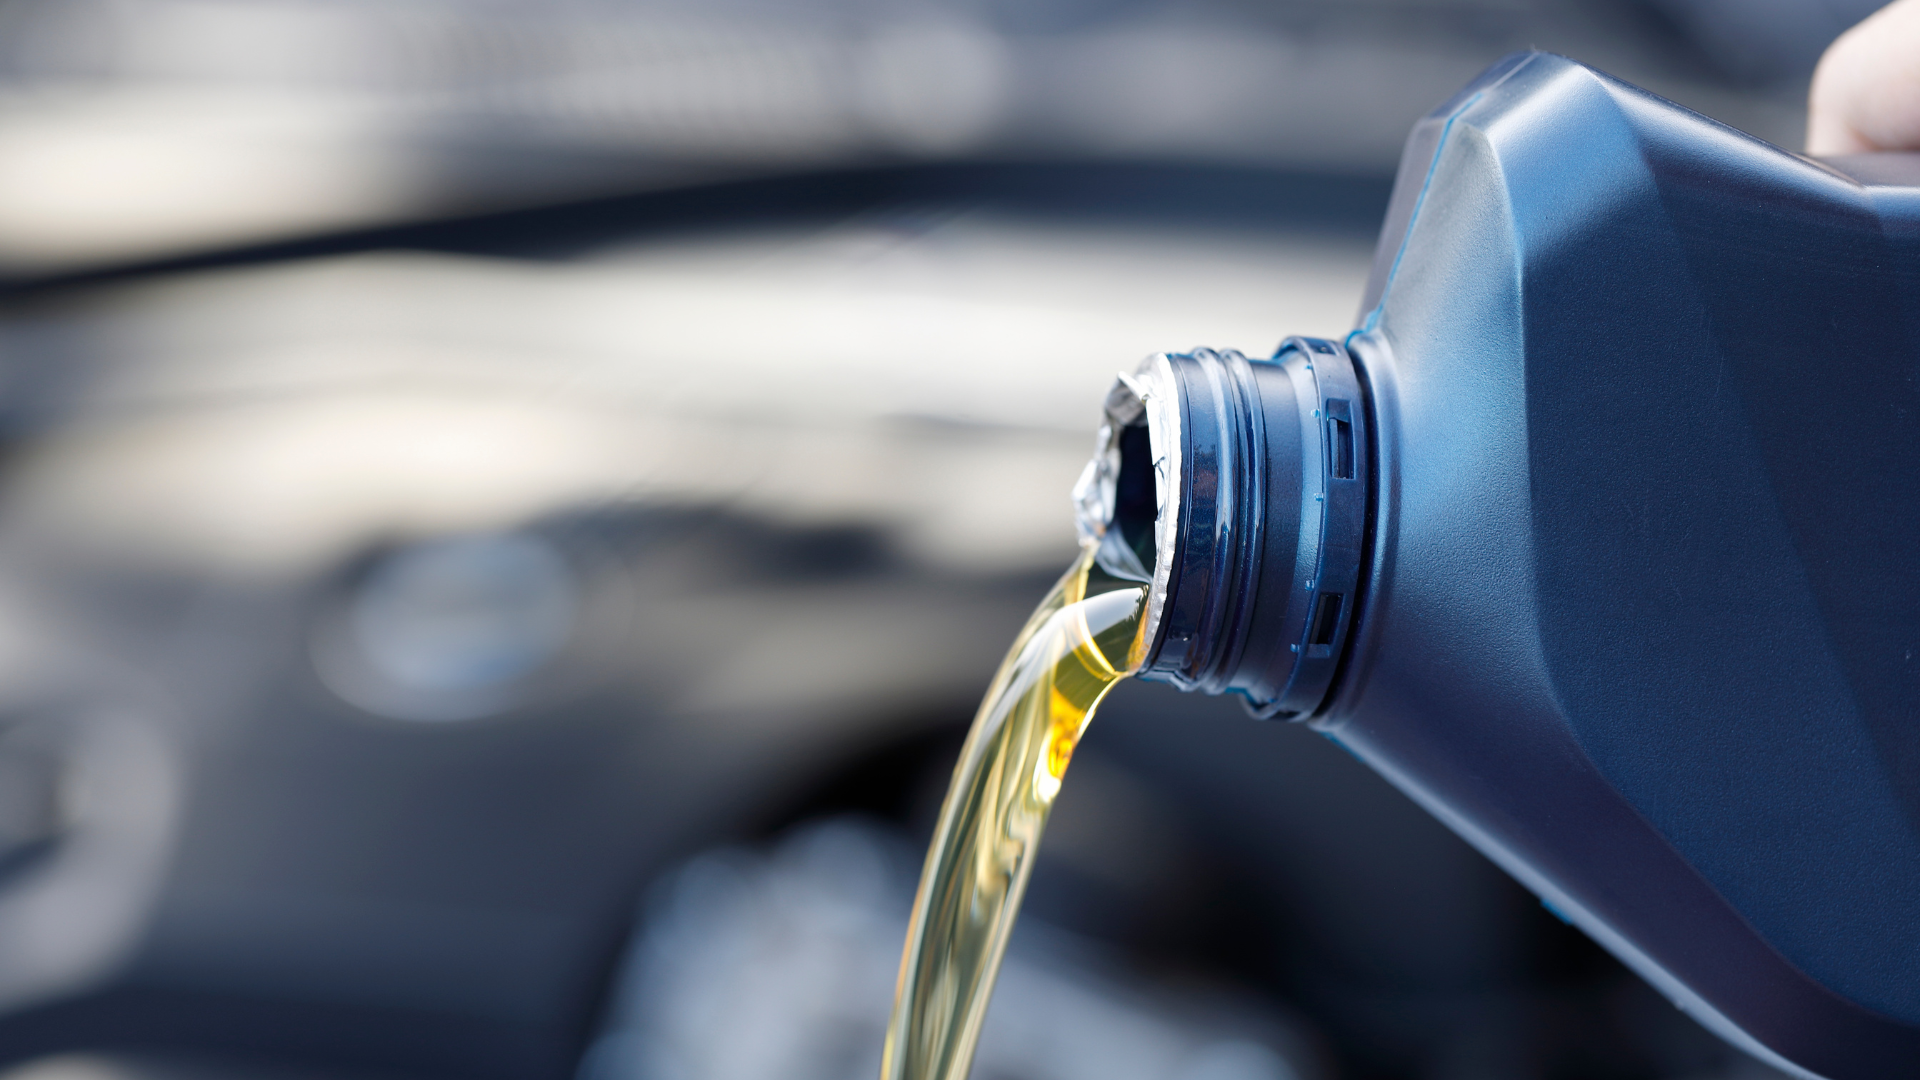 Dipstick Oil Analysis: How to Check Oil